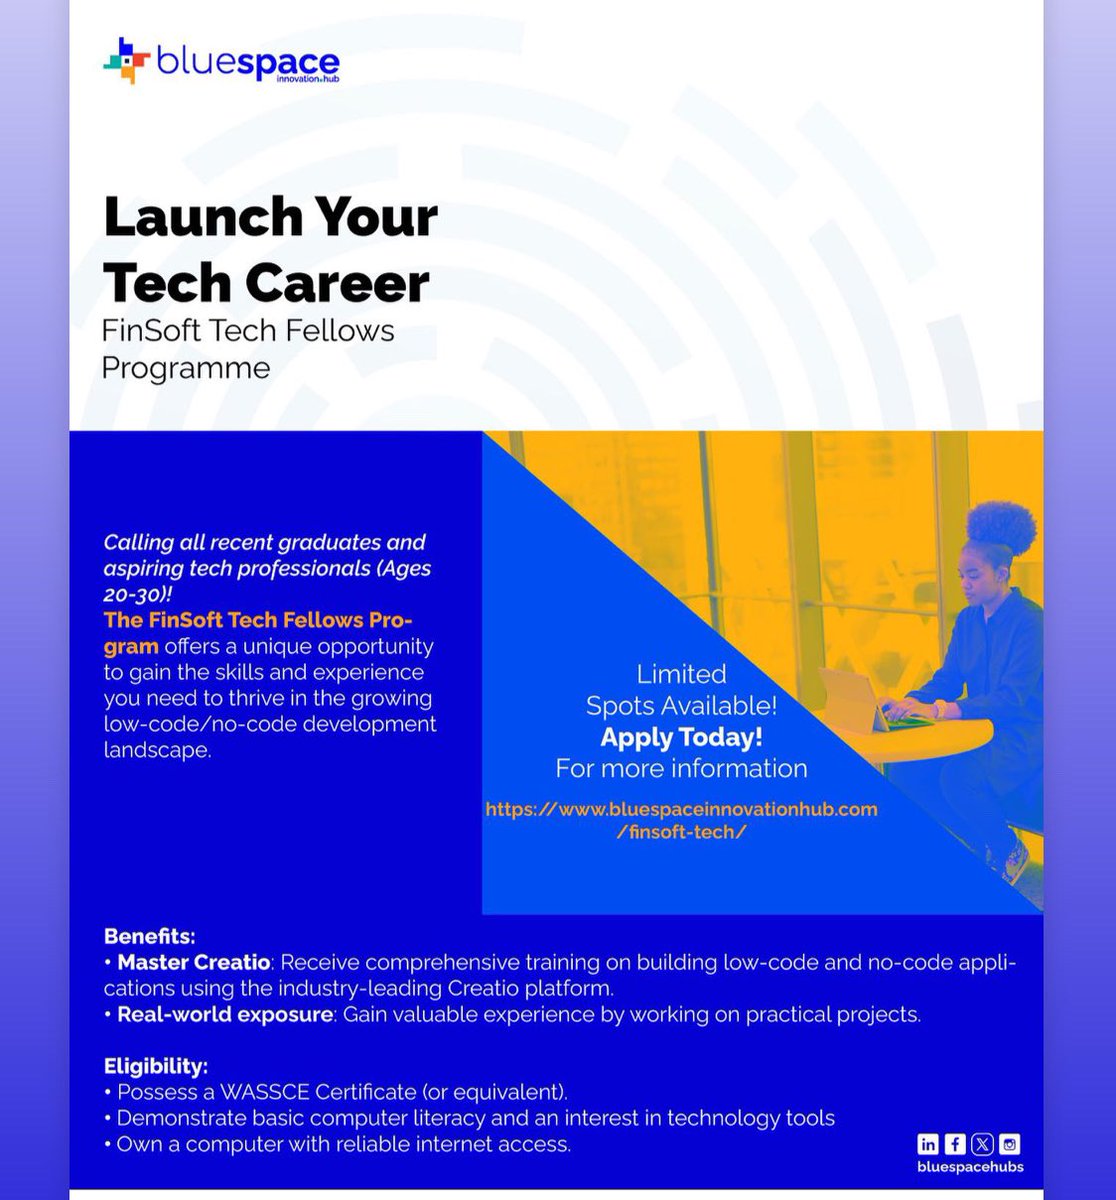 Launch Your Tech Career with FinSoft Tech Fellows Programme! 

Are you a recent graduate eager to dive into the world of low-code/no-code development? 

 #TechFellows #InnovationHub #TechCareers

forms.gle/jsrbMZKuyJo161…